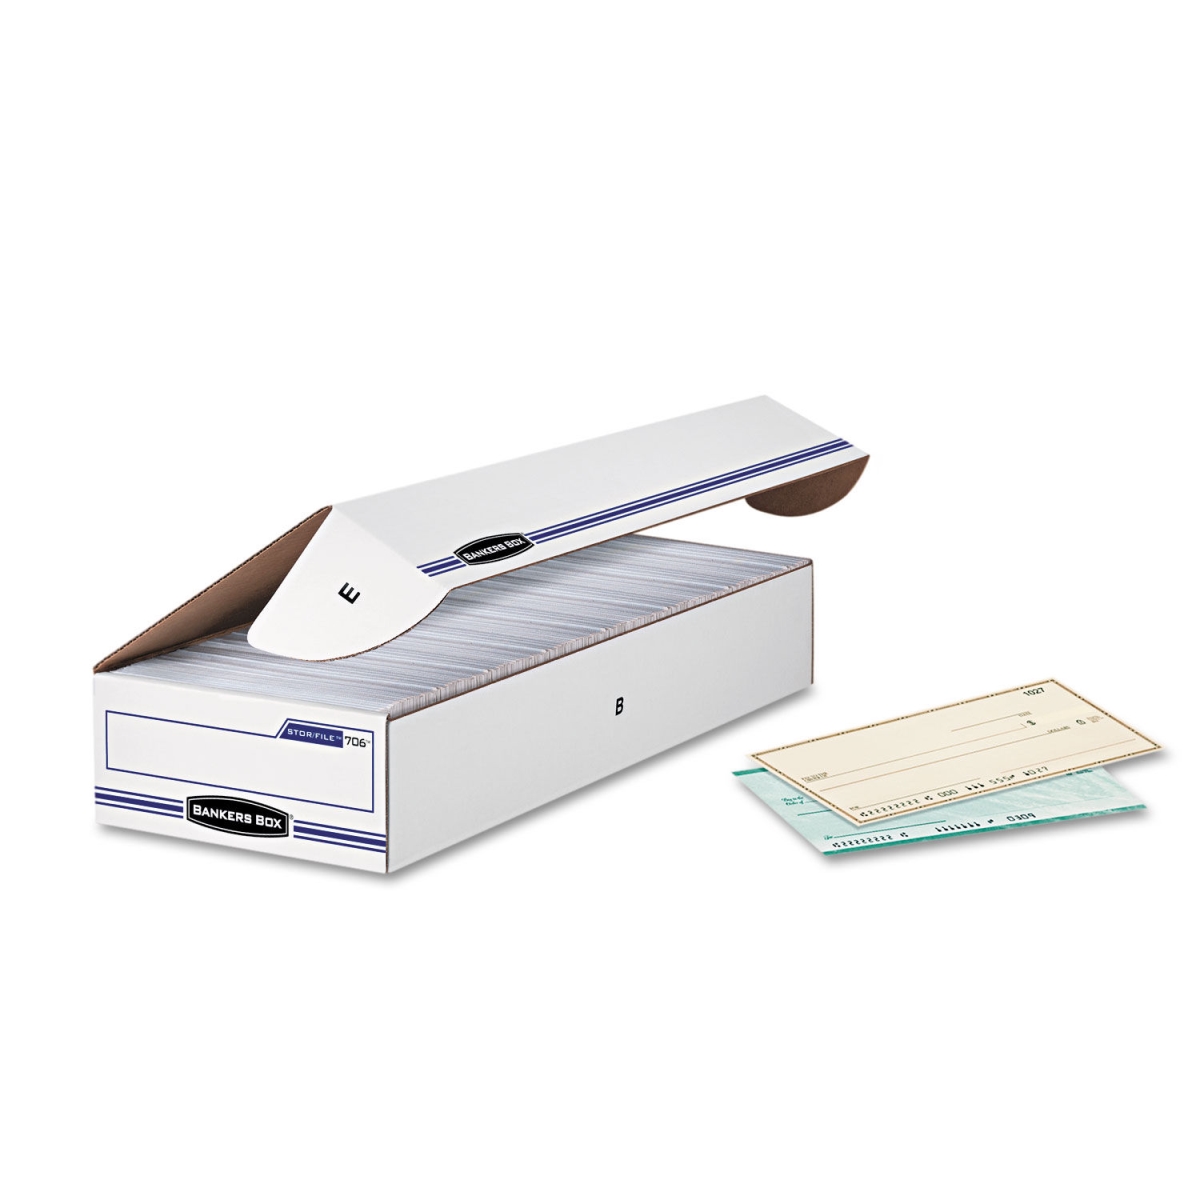 Picture of Bankers Box FEL00706 9 x 24 x 4 in. Box Storage & File Check - Pack of 12